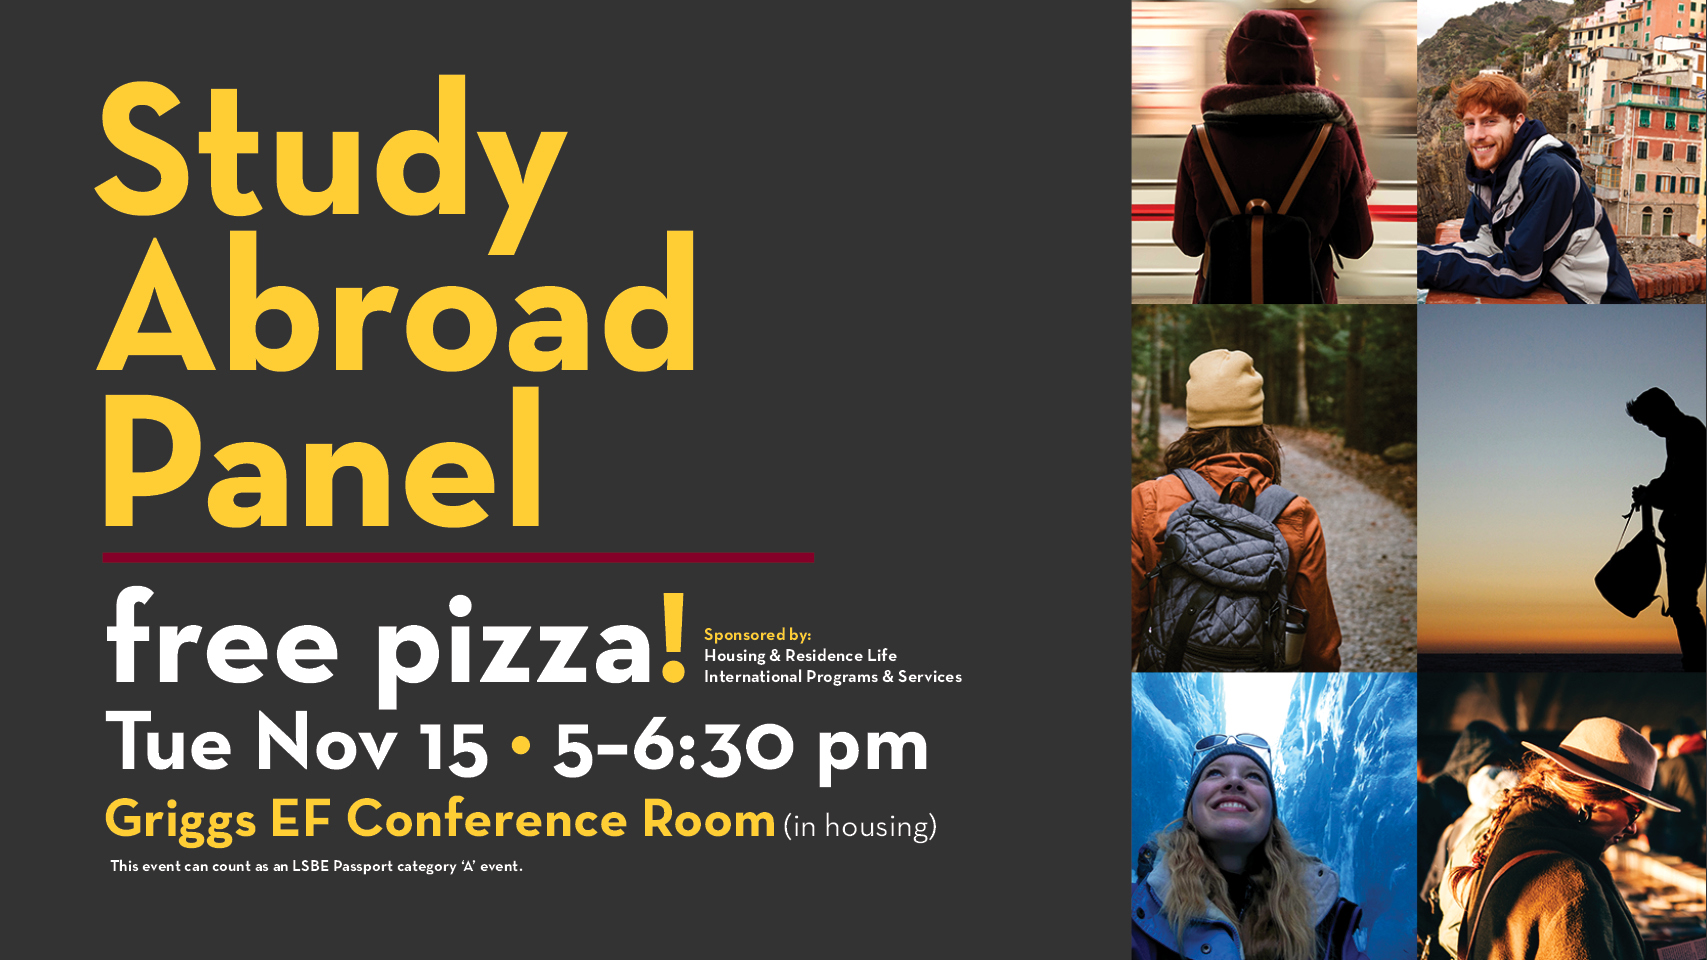 Study Aboard Panel Infographic which advertises free pizza. 